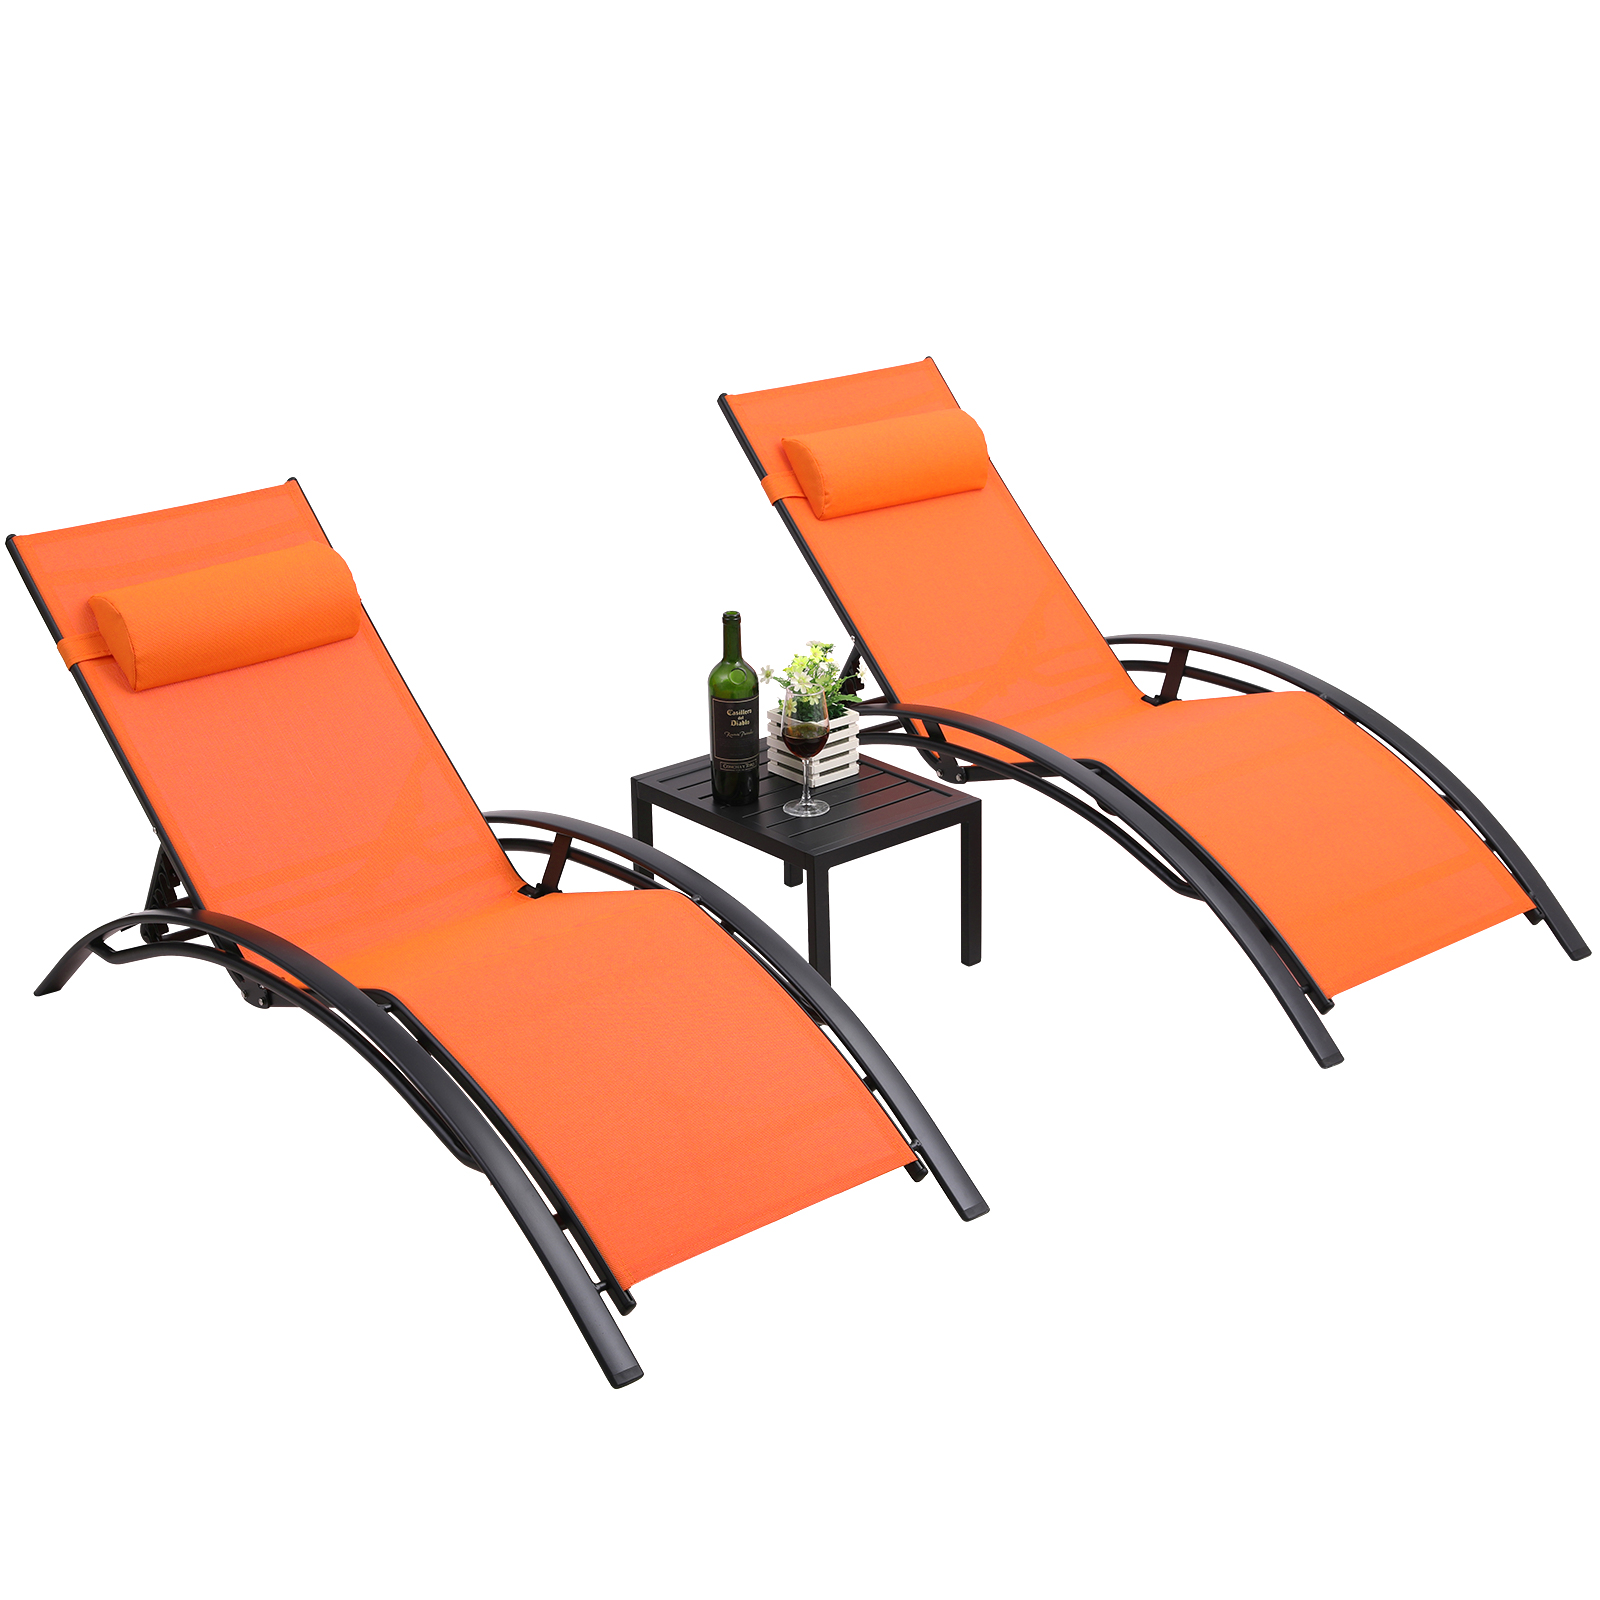 LAZY BUDDY 3pcs Outdoor Beach Pool Chaise Lounge Chairs, Sunbathing Lounger Recliner Chair with Side Table - image 1 of 8